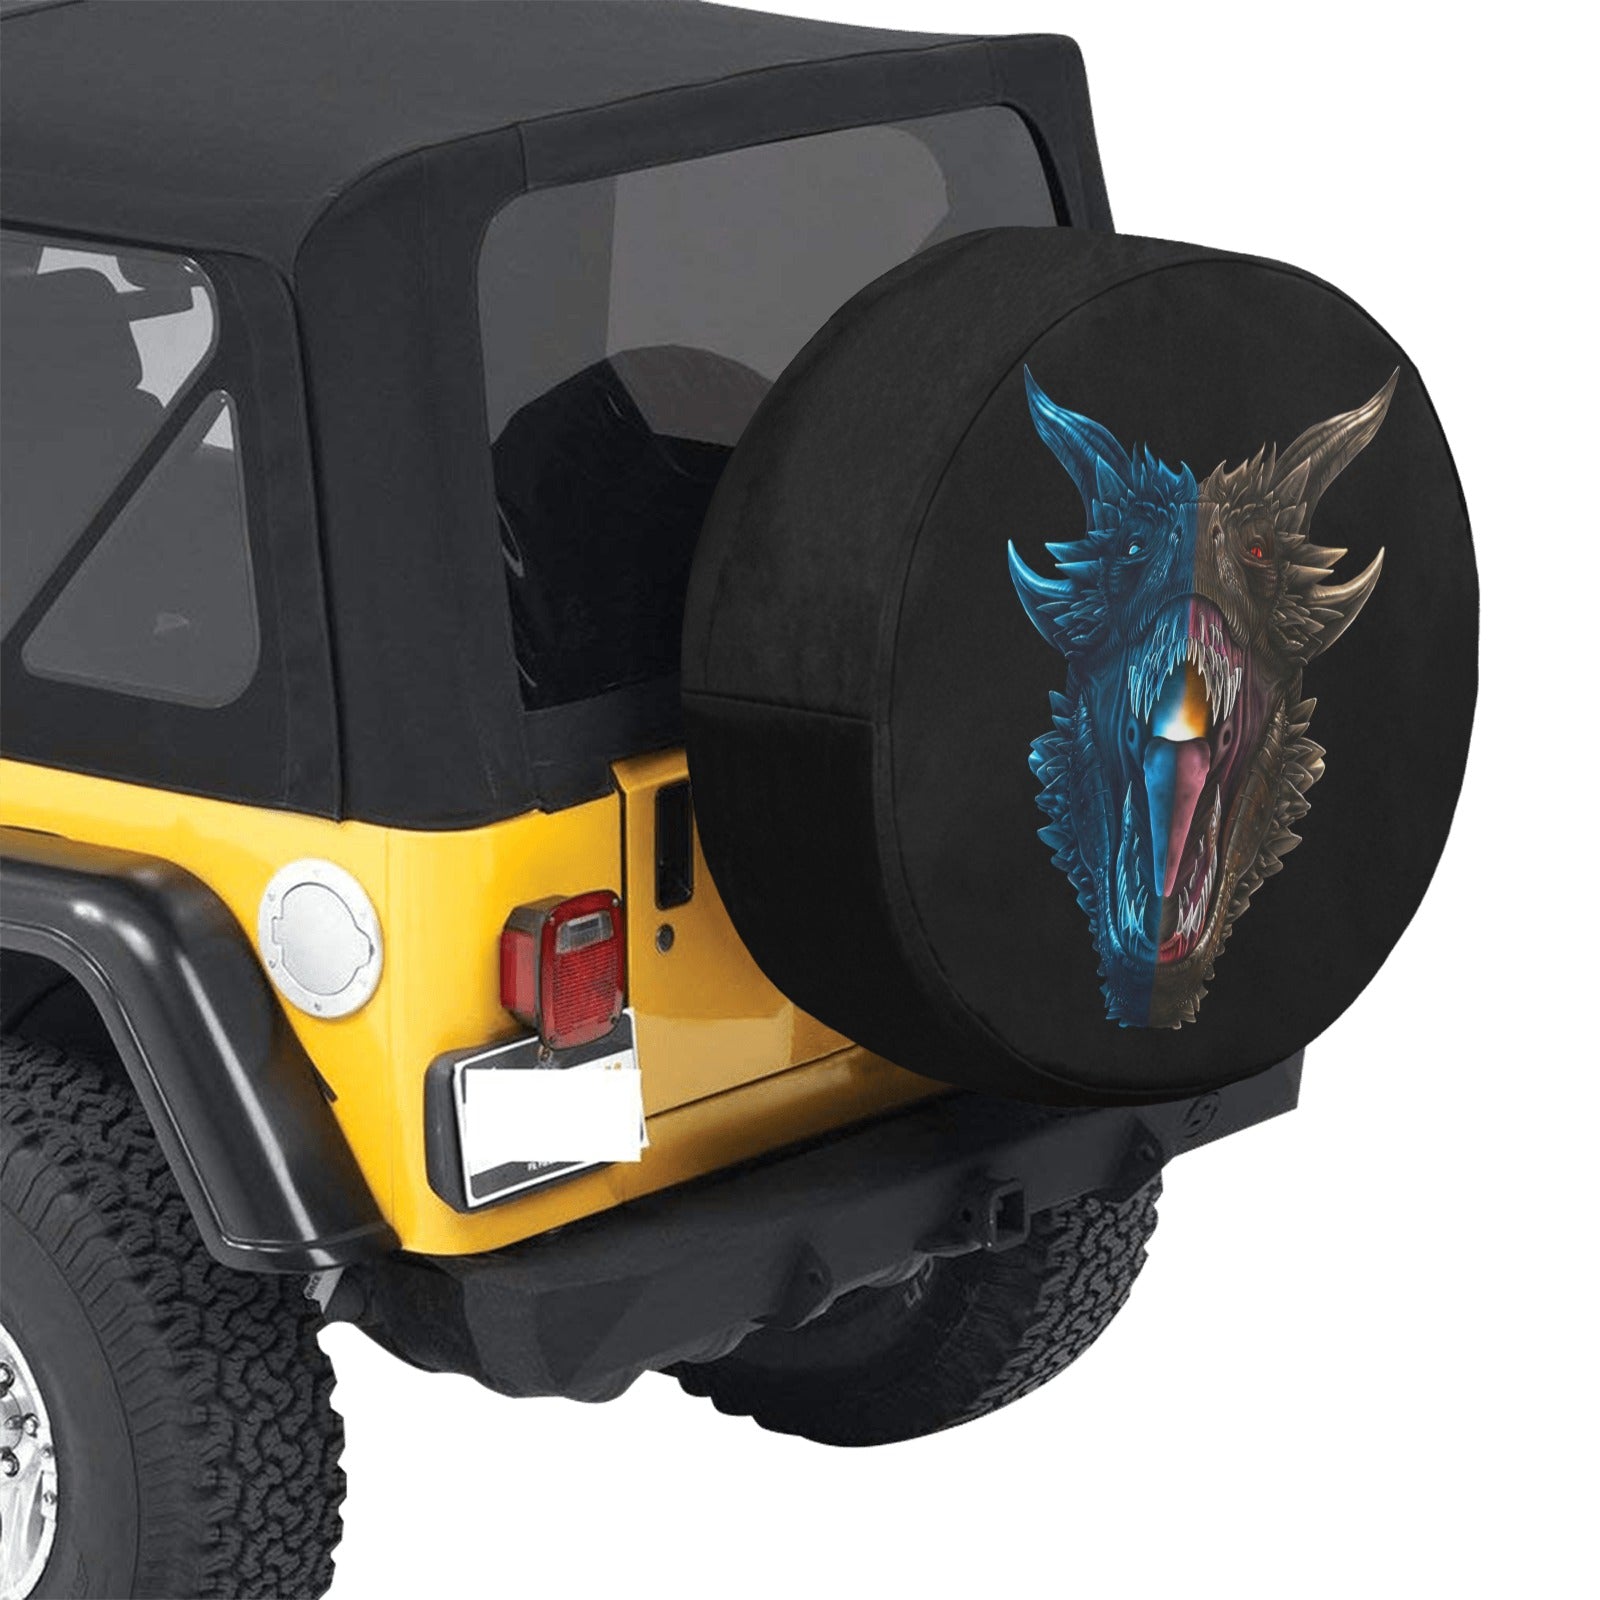 Roaring Dragon in the Dark Spare Tire Cover (Large)(17")